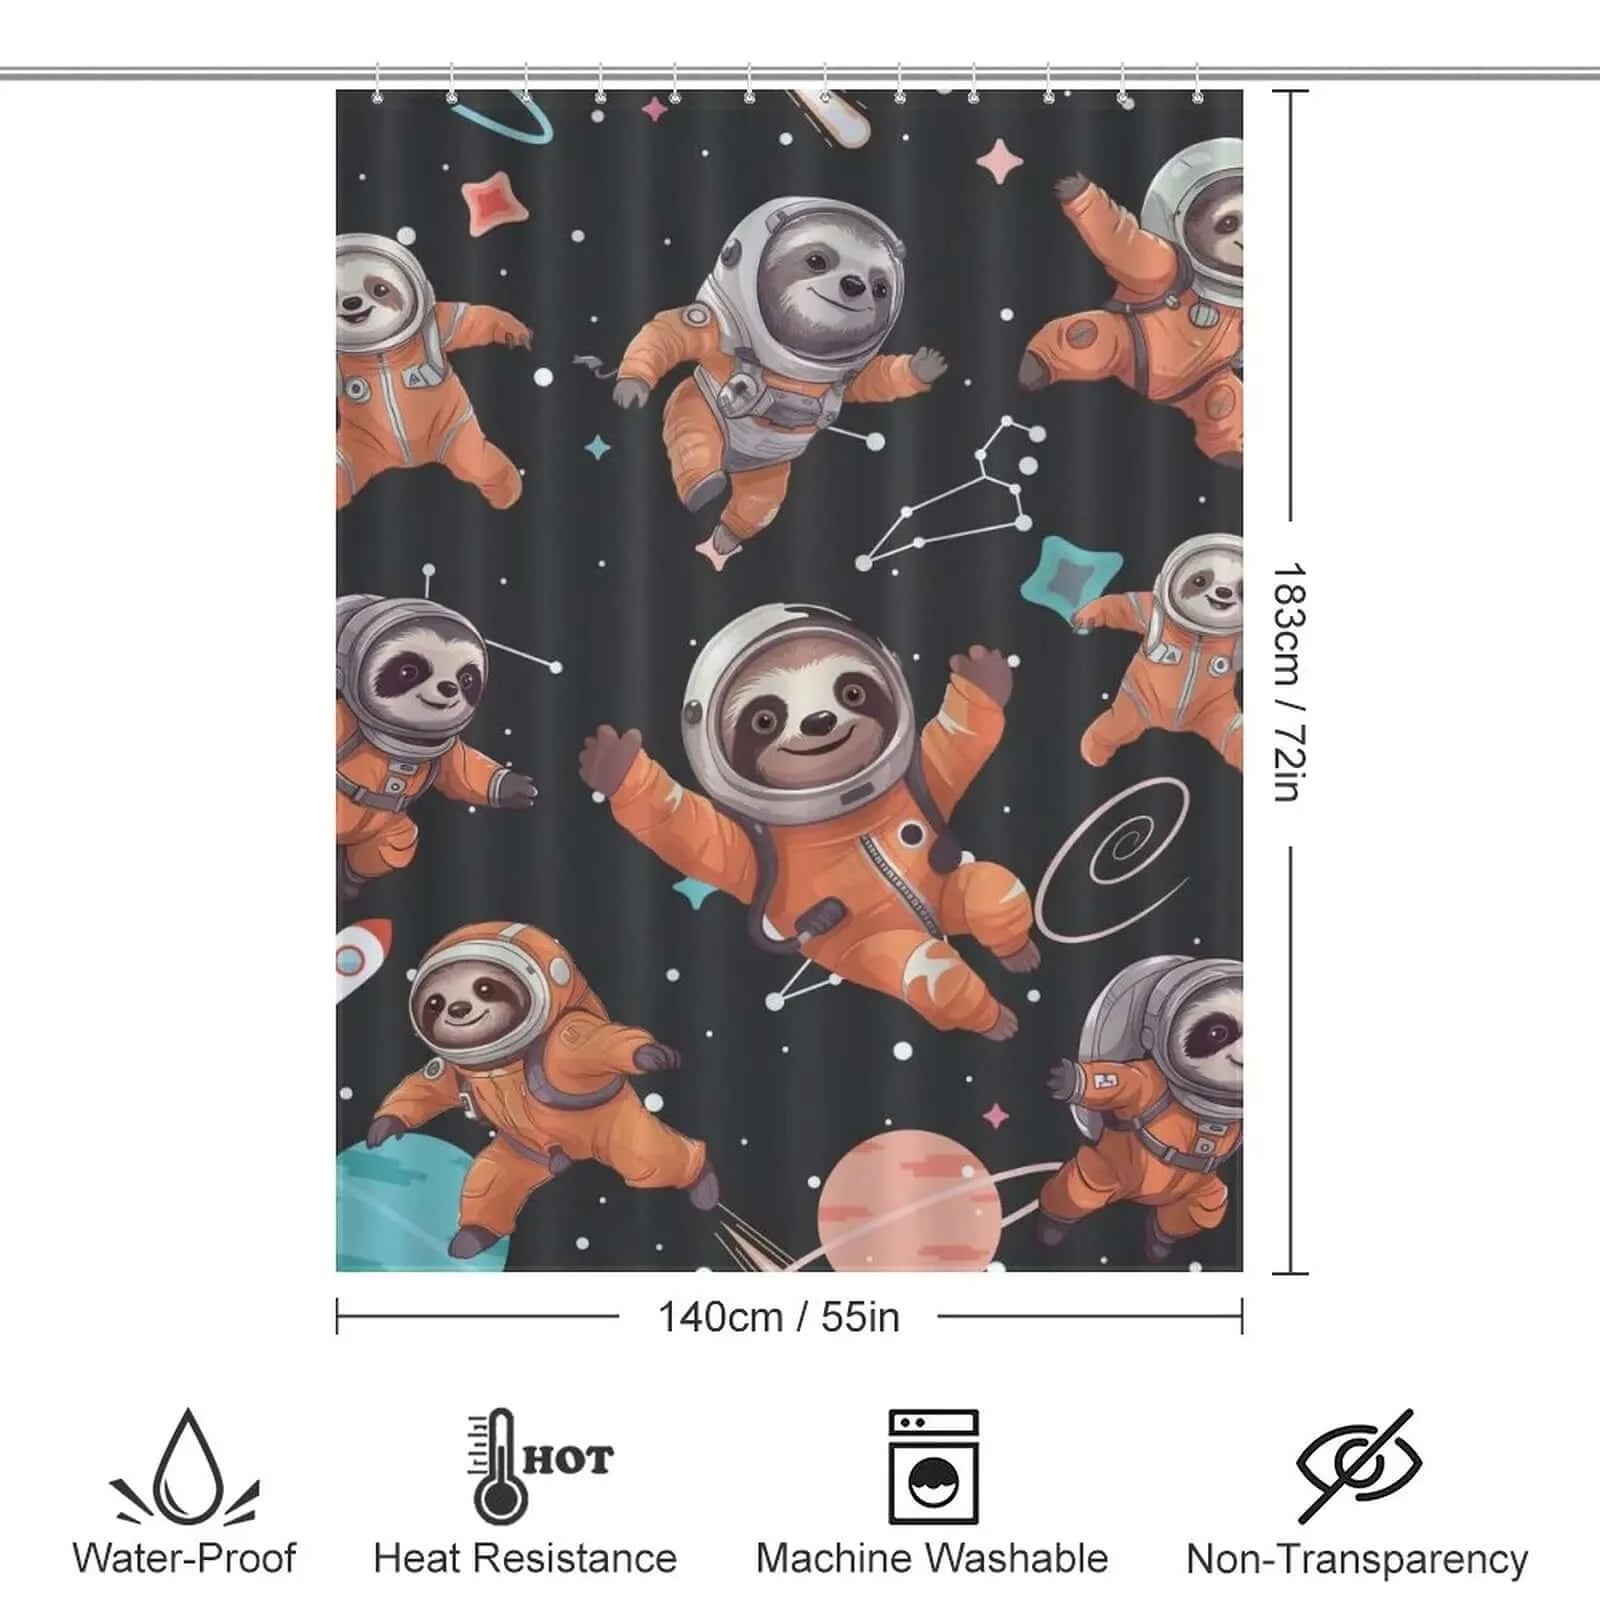 This durable Cotton Cat shower curtain features a whimsical design of Sloth Astronauts.